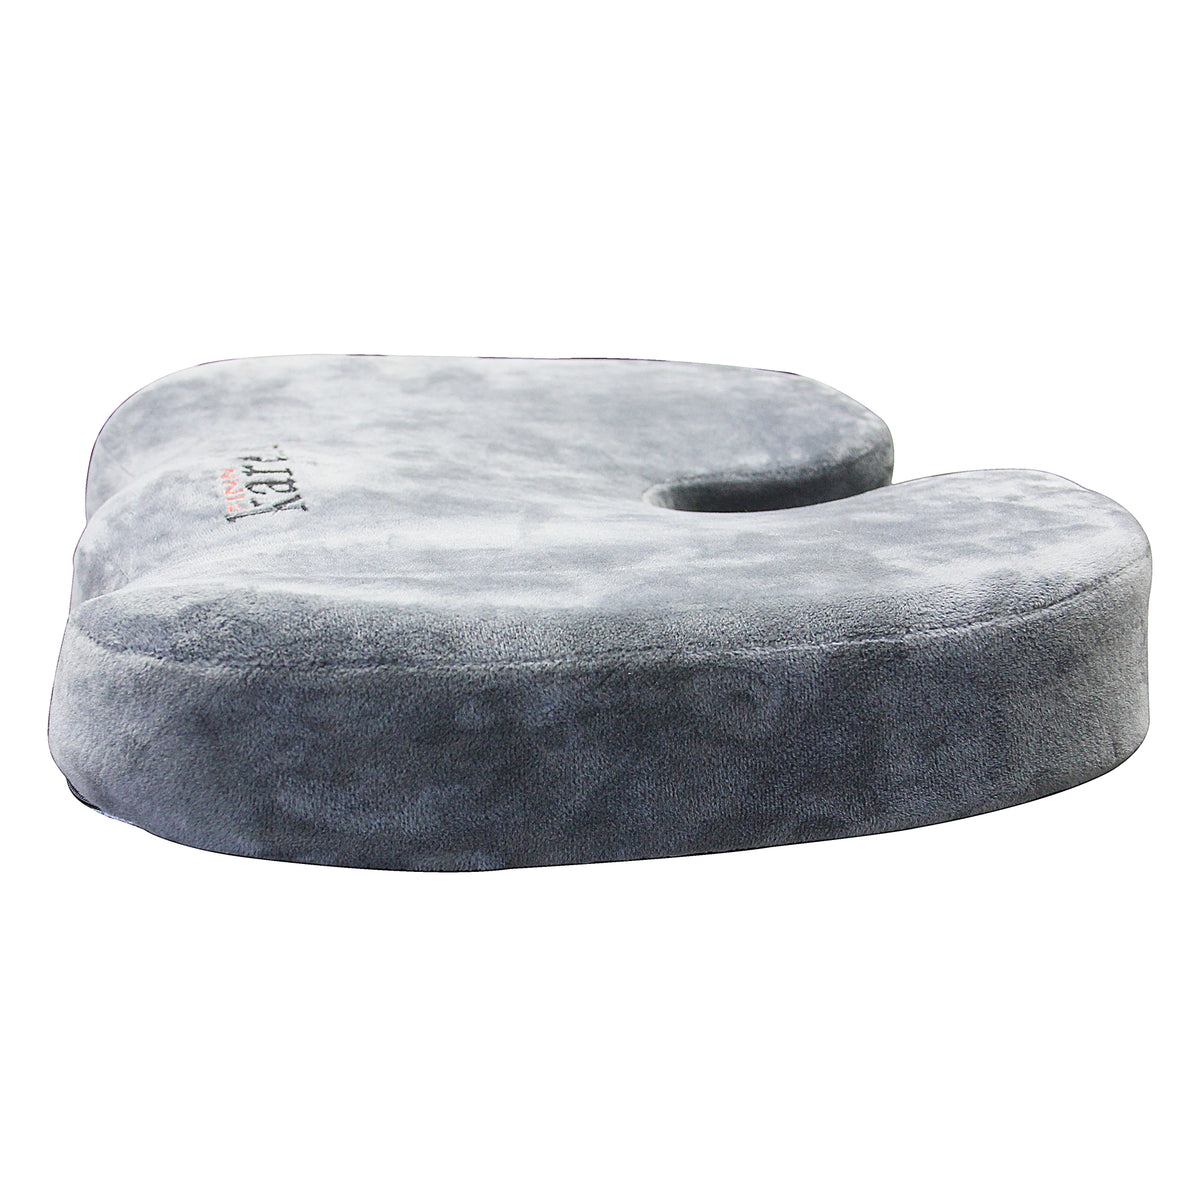 3.9 Thick Therapeutic Memory Foam Relief Cushion - Great for Sciatica, Hemorrhoids, Lower Back Pain and More!